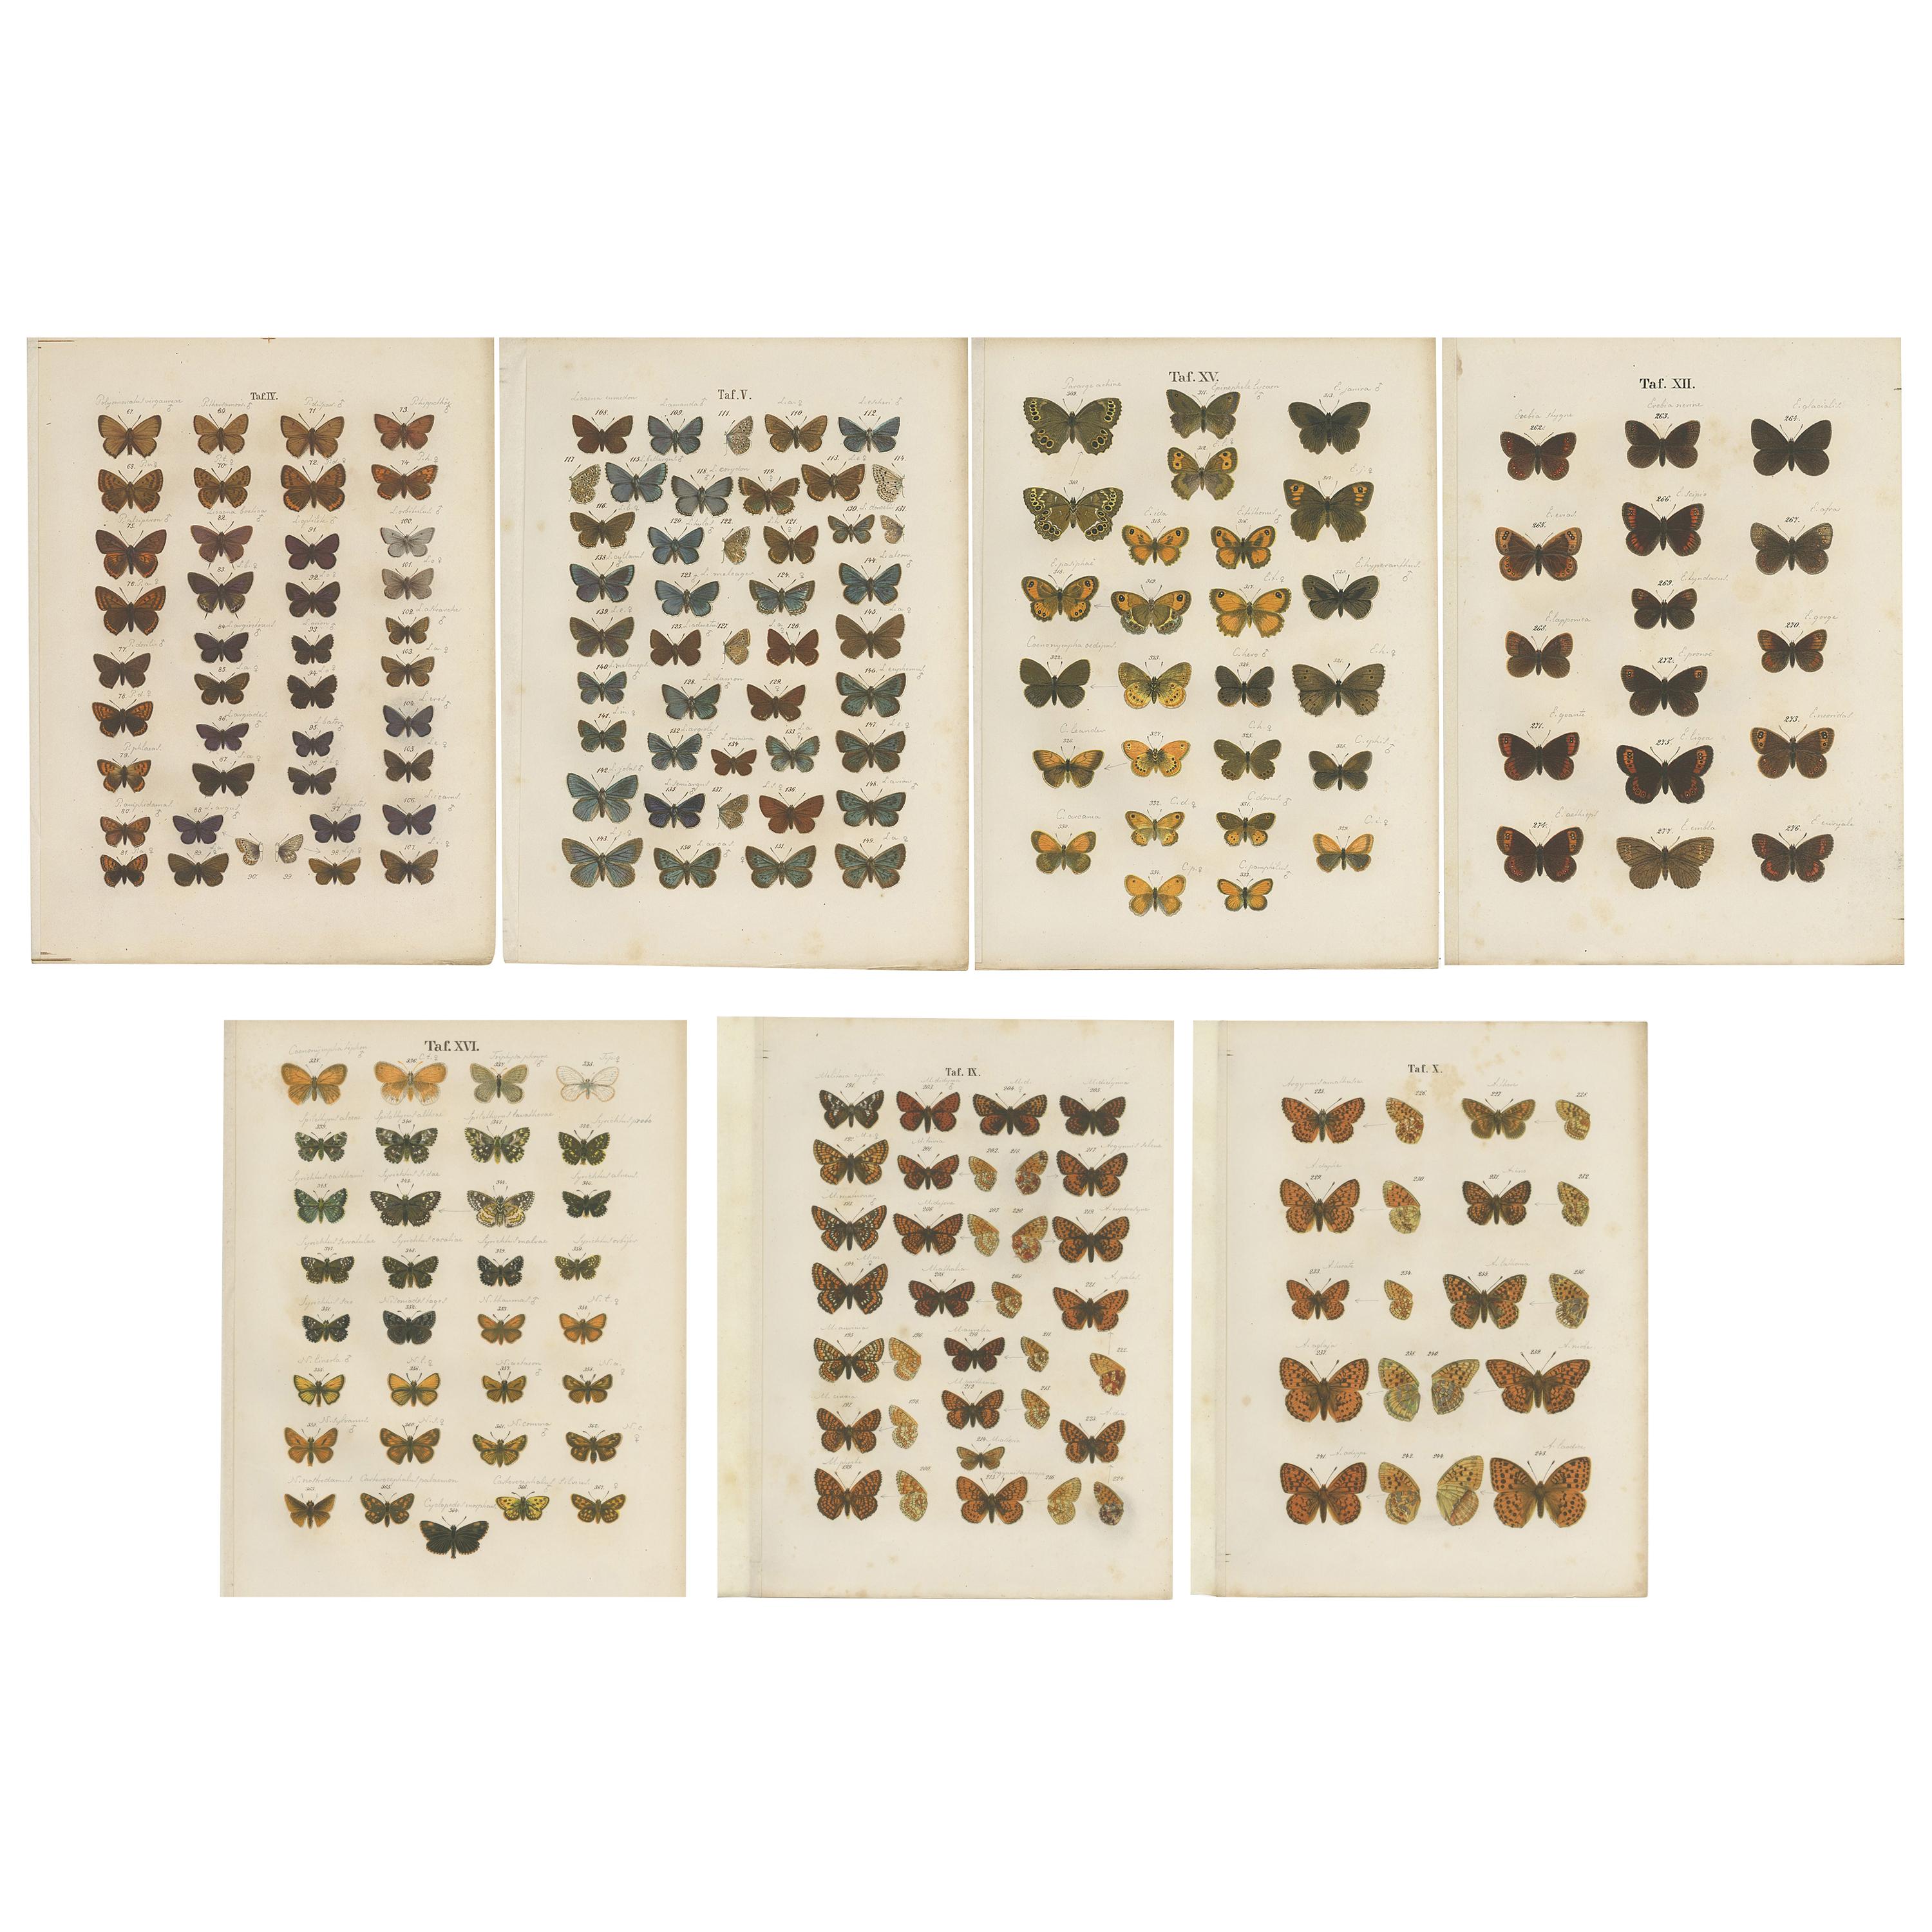 Set of 7 Antique Prints of Various Butterflies and Moths by Ramann 'circa 1870'